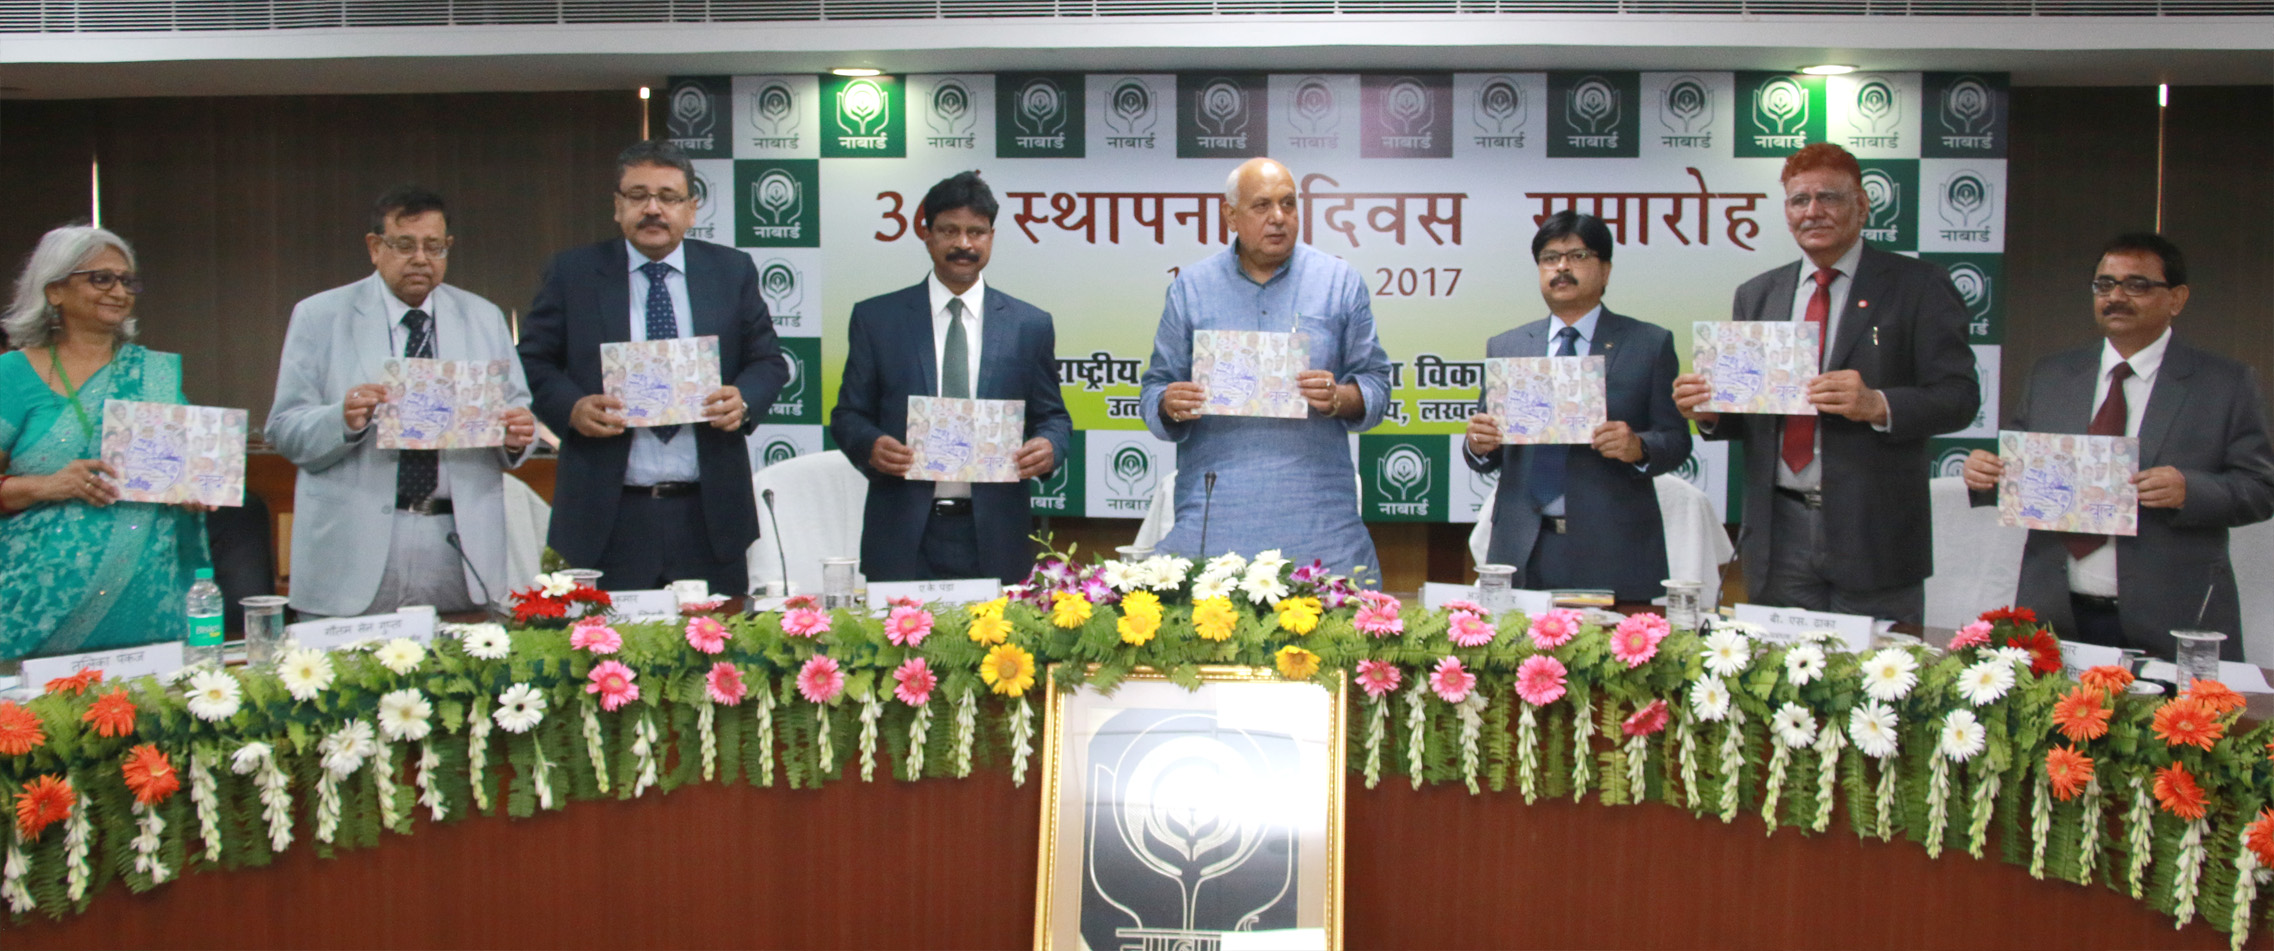 NABARD Book BOOND Launch by Agriculture Minister of UP with NABARD and RBI Officials